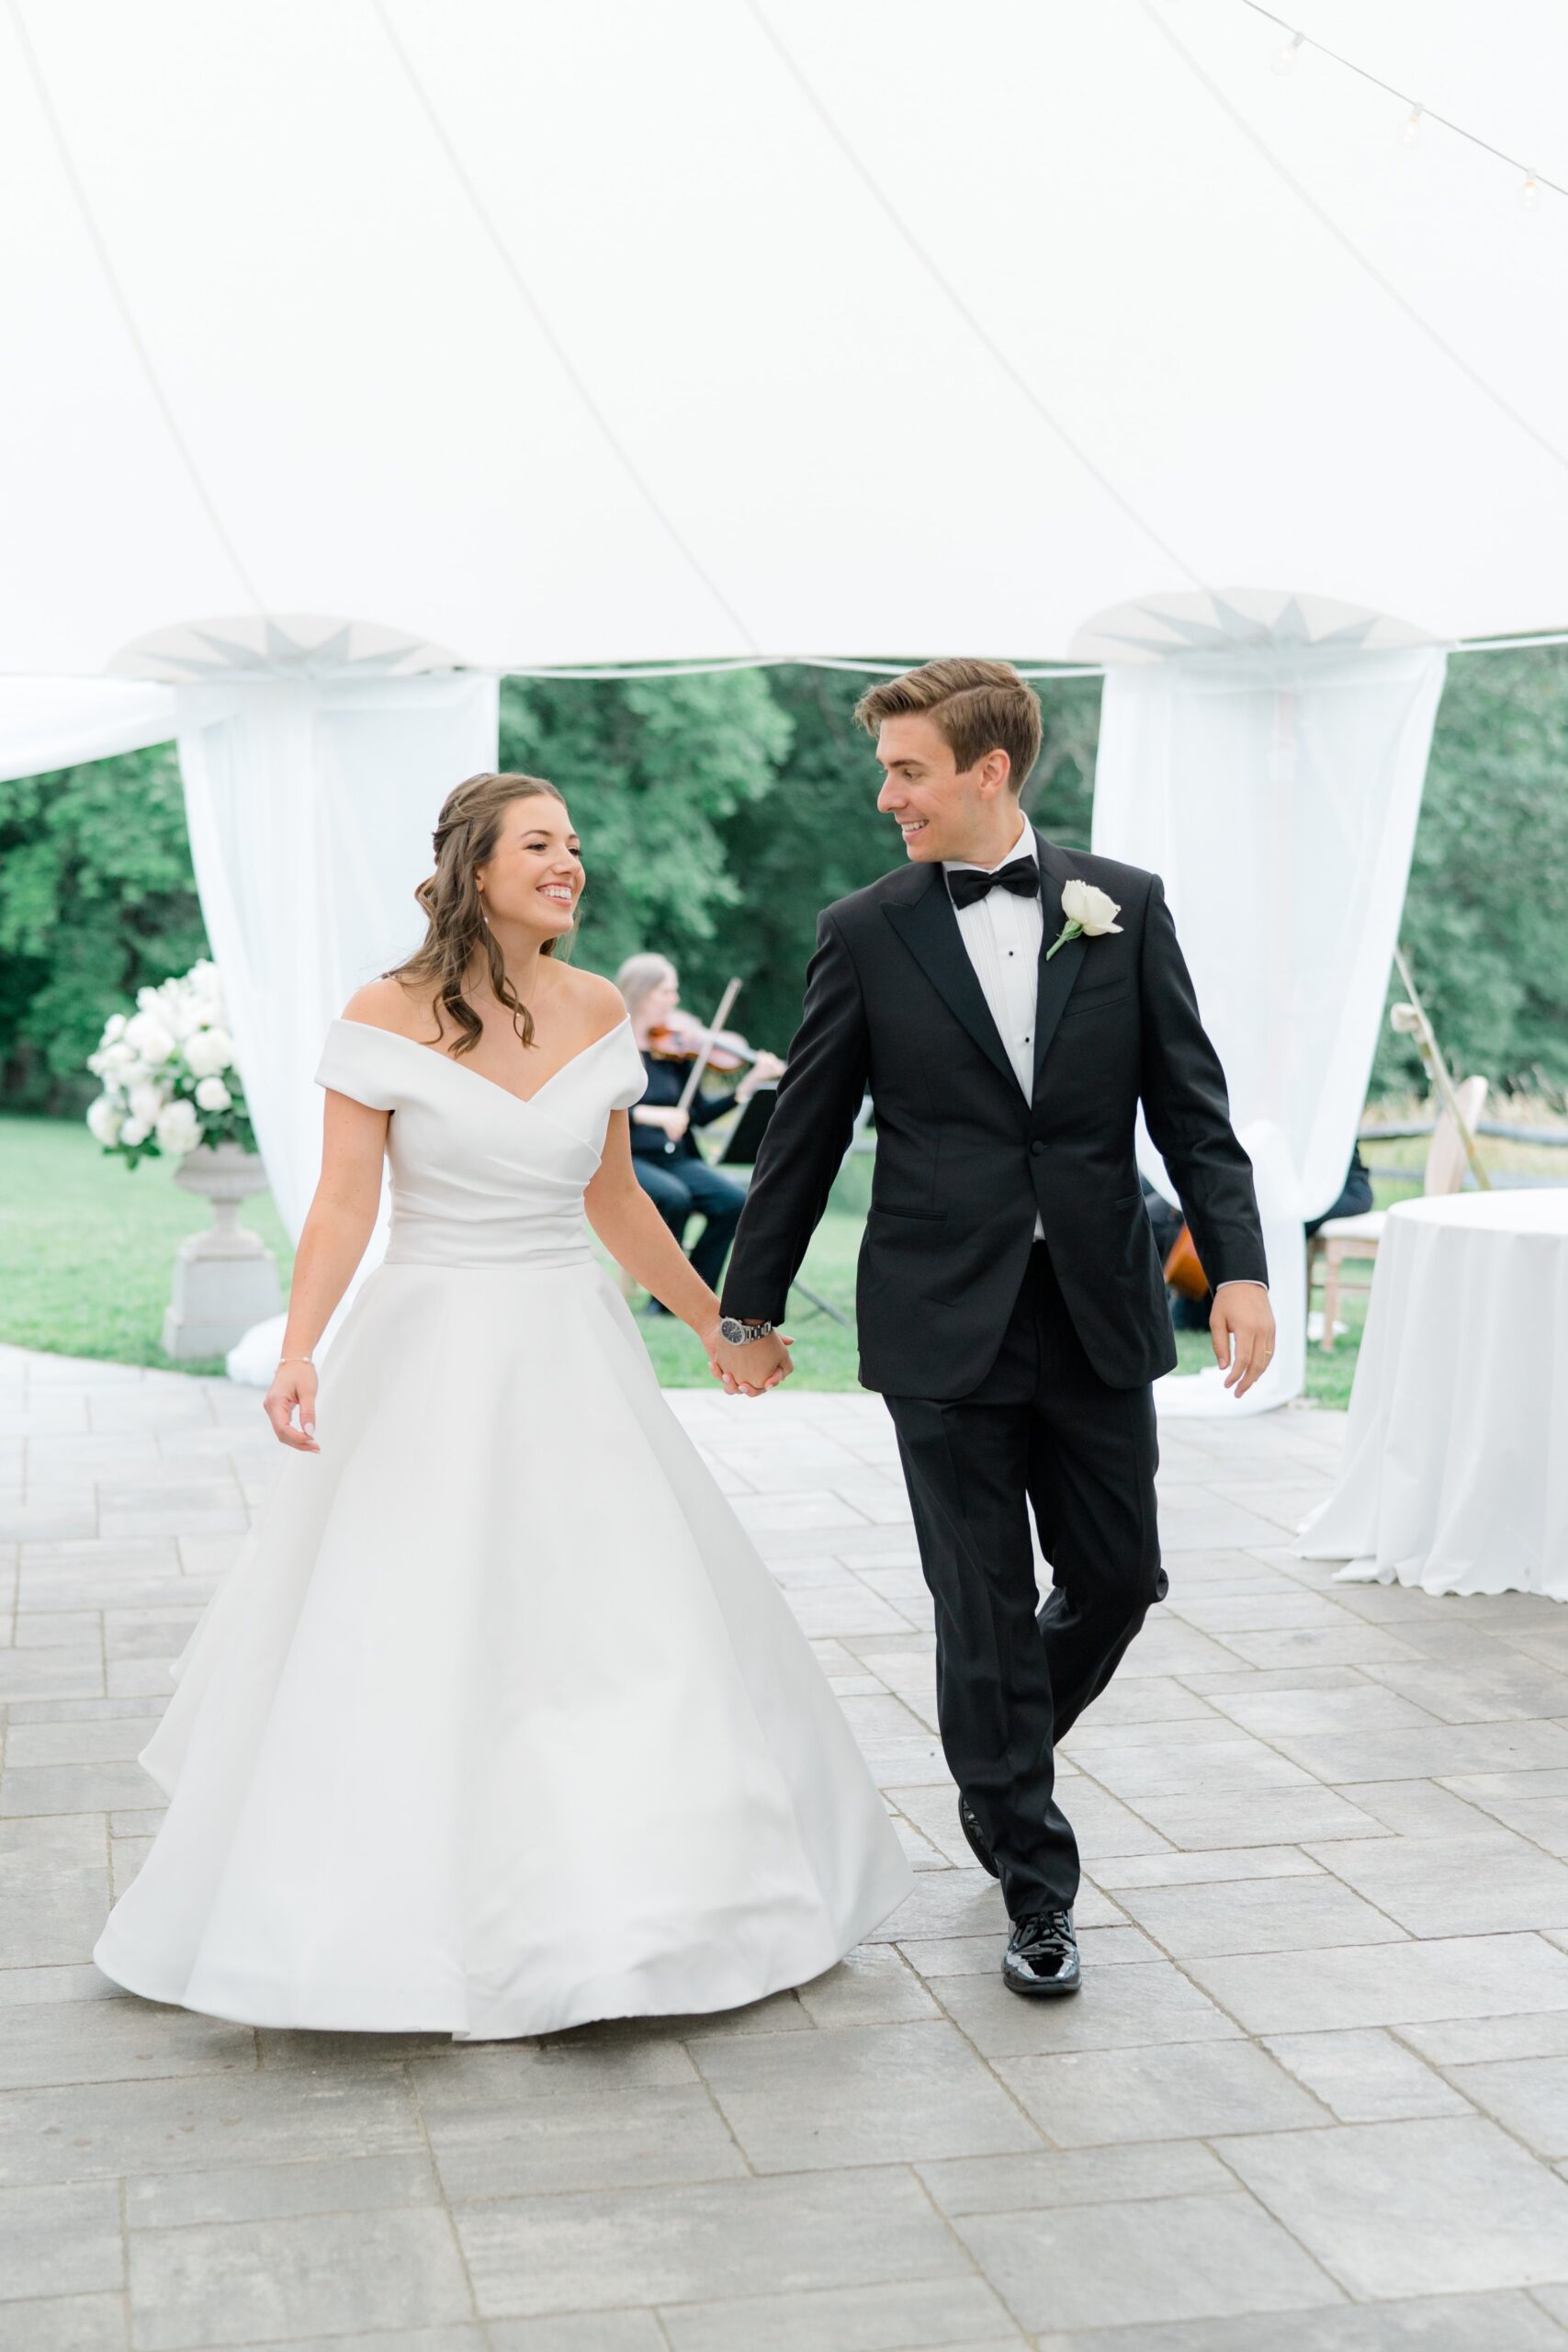 Bride and groom walk to first dance at boston summer wedding.